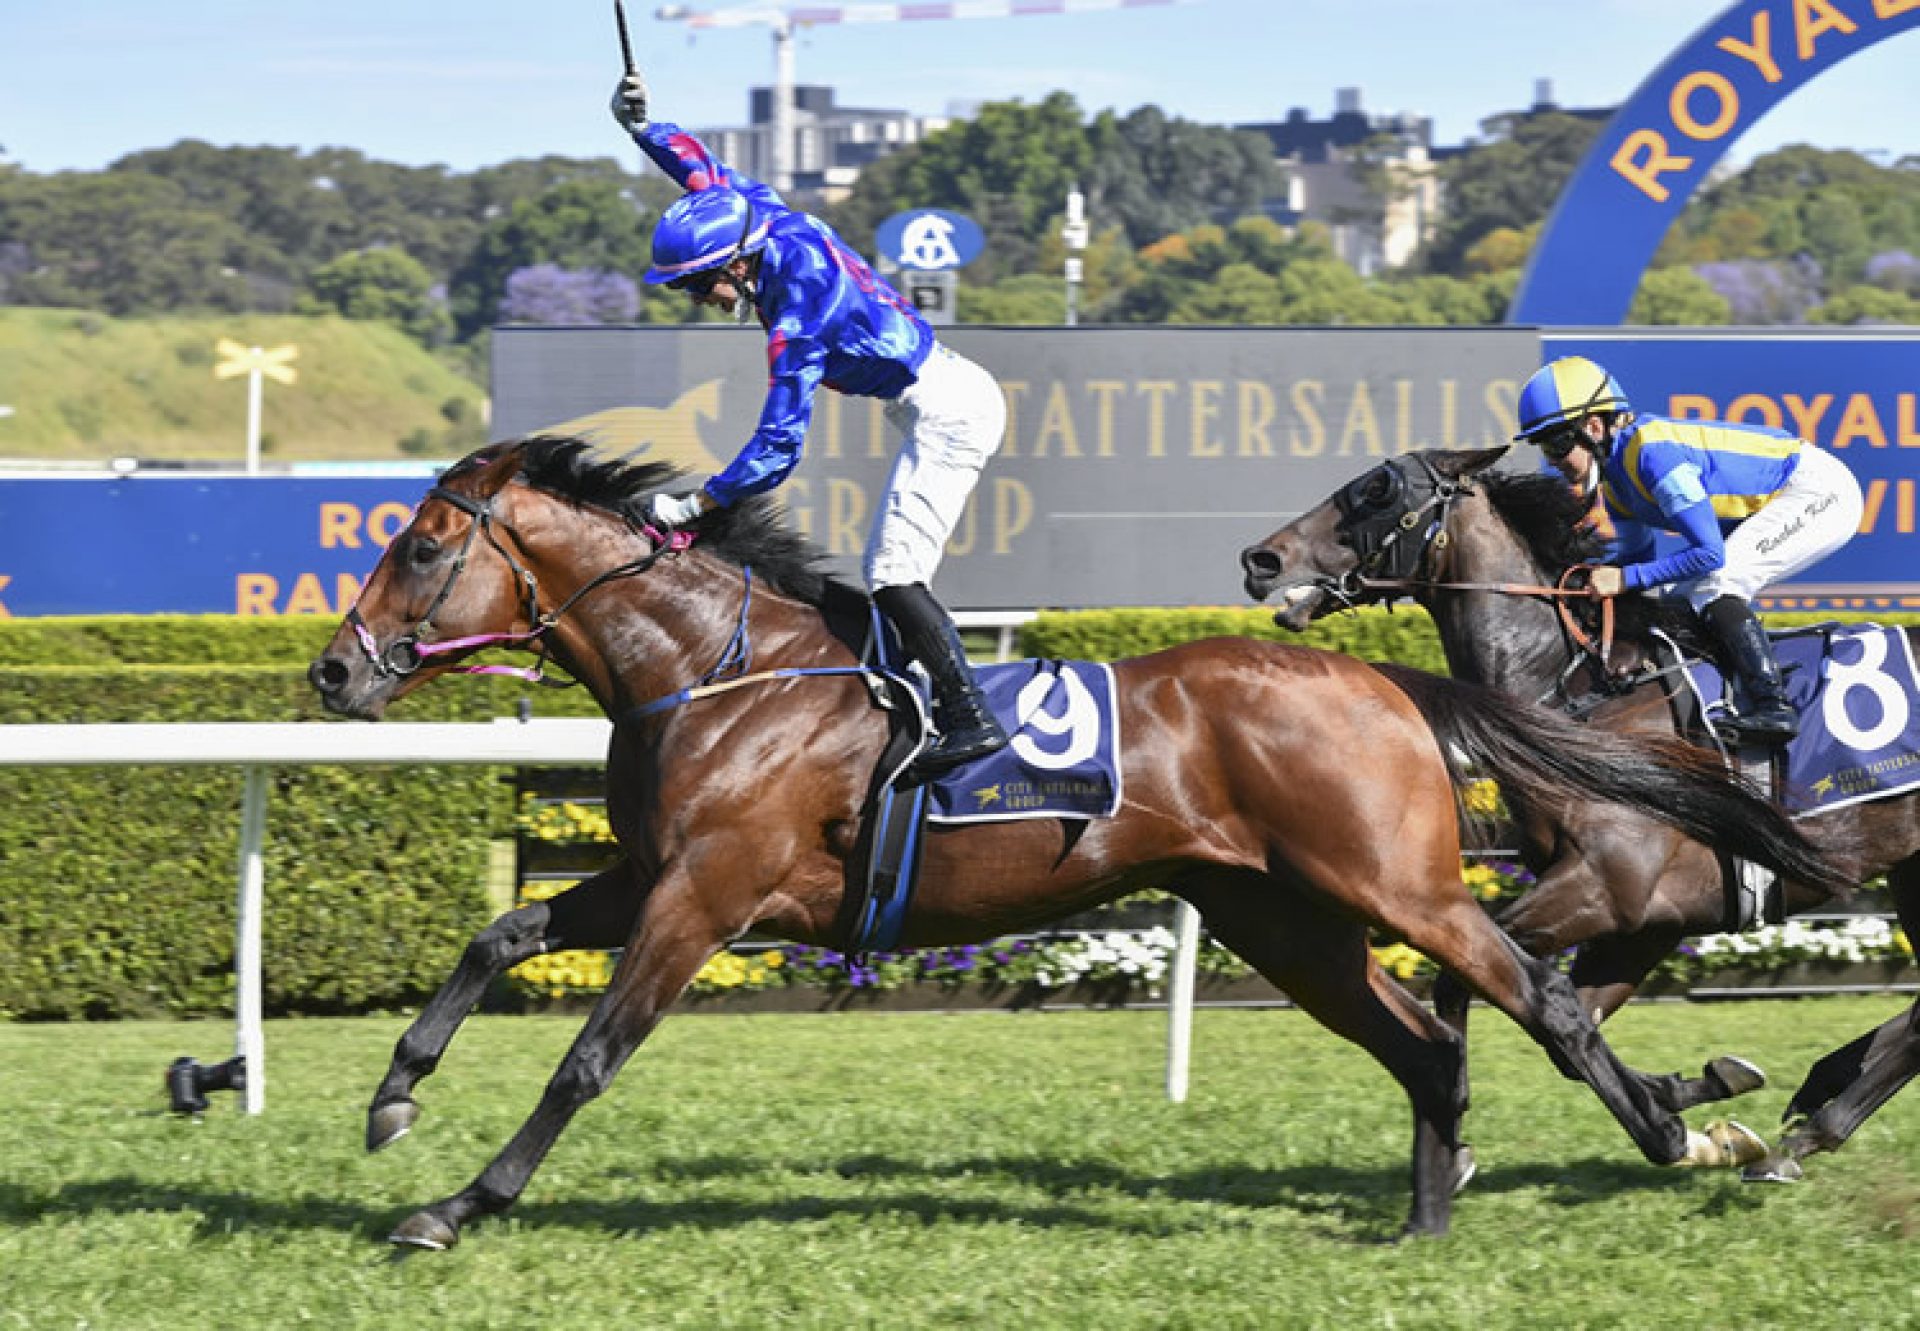 Torrens (Adelaide) winning the Listed Tattersalls Cup at Randwick